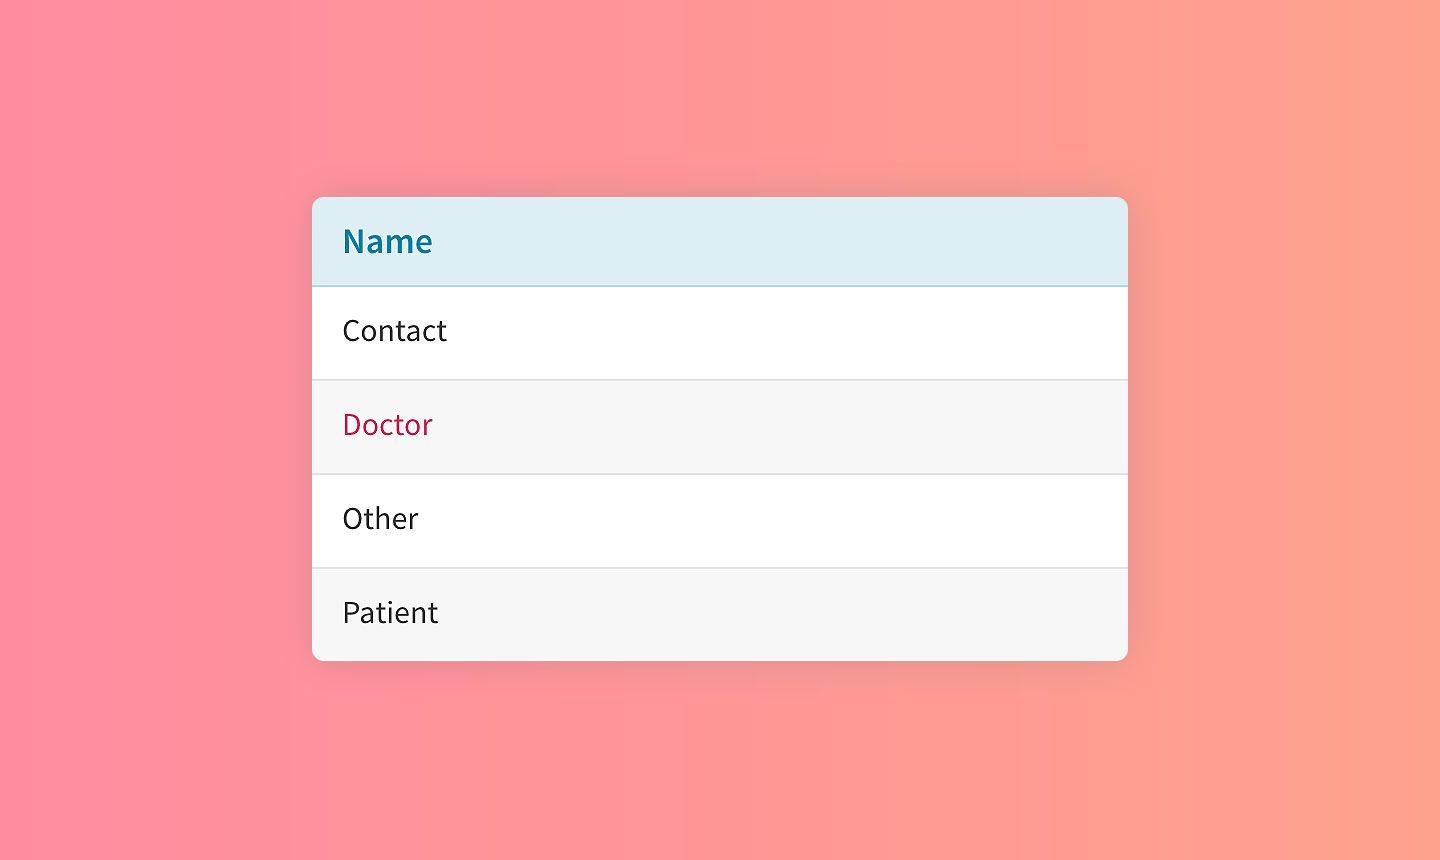 List of referral sources including contact, doctor, patient and other.